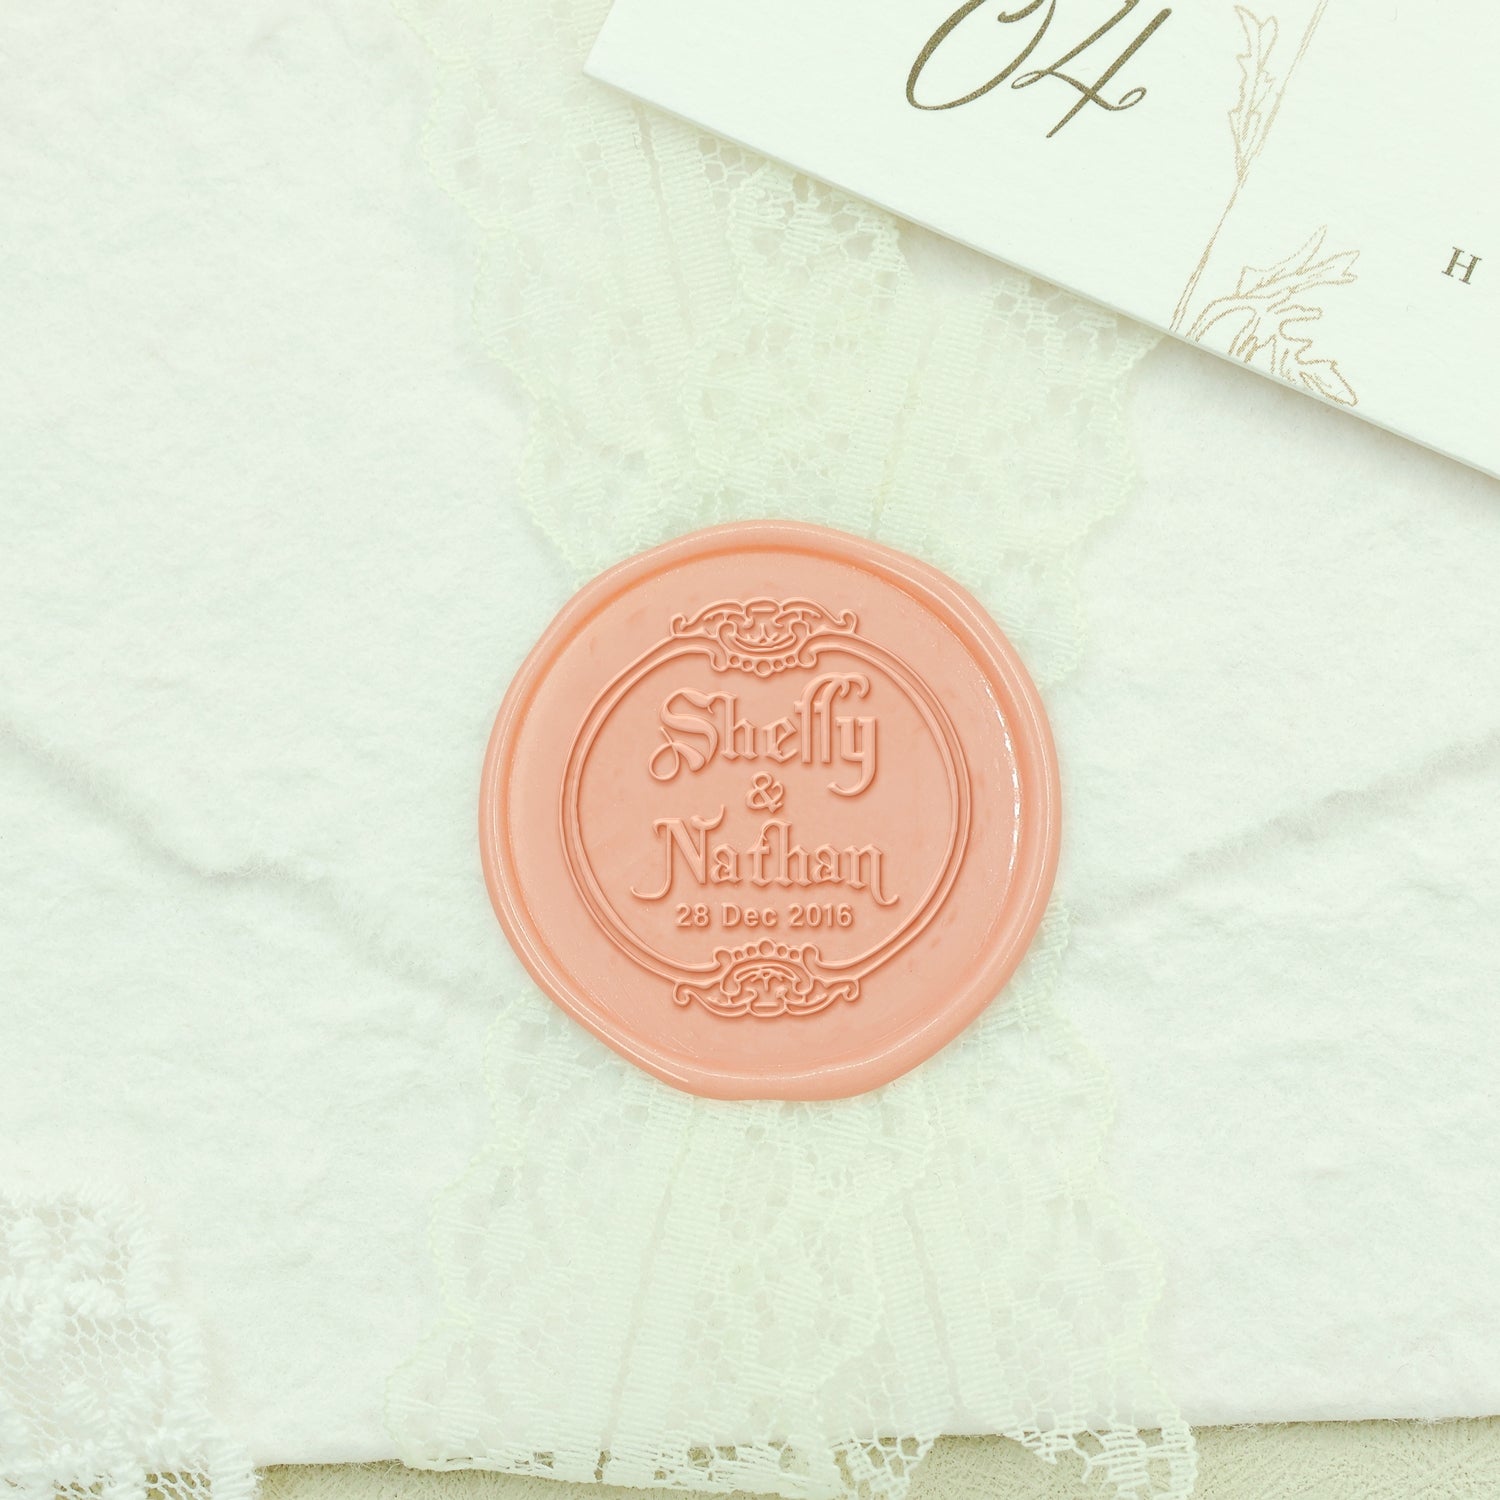 Custom Made Wax Seal Stamp - Personalized Custom Initials, Monograms & Text Wax Seal Stamp - for Wedding / Personal Use